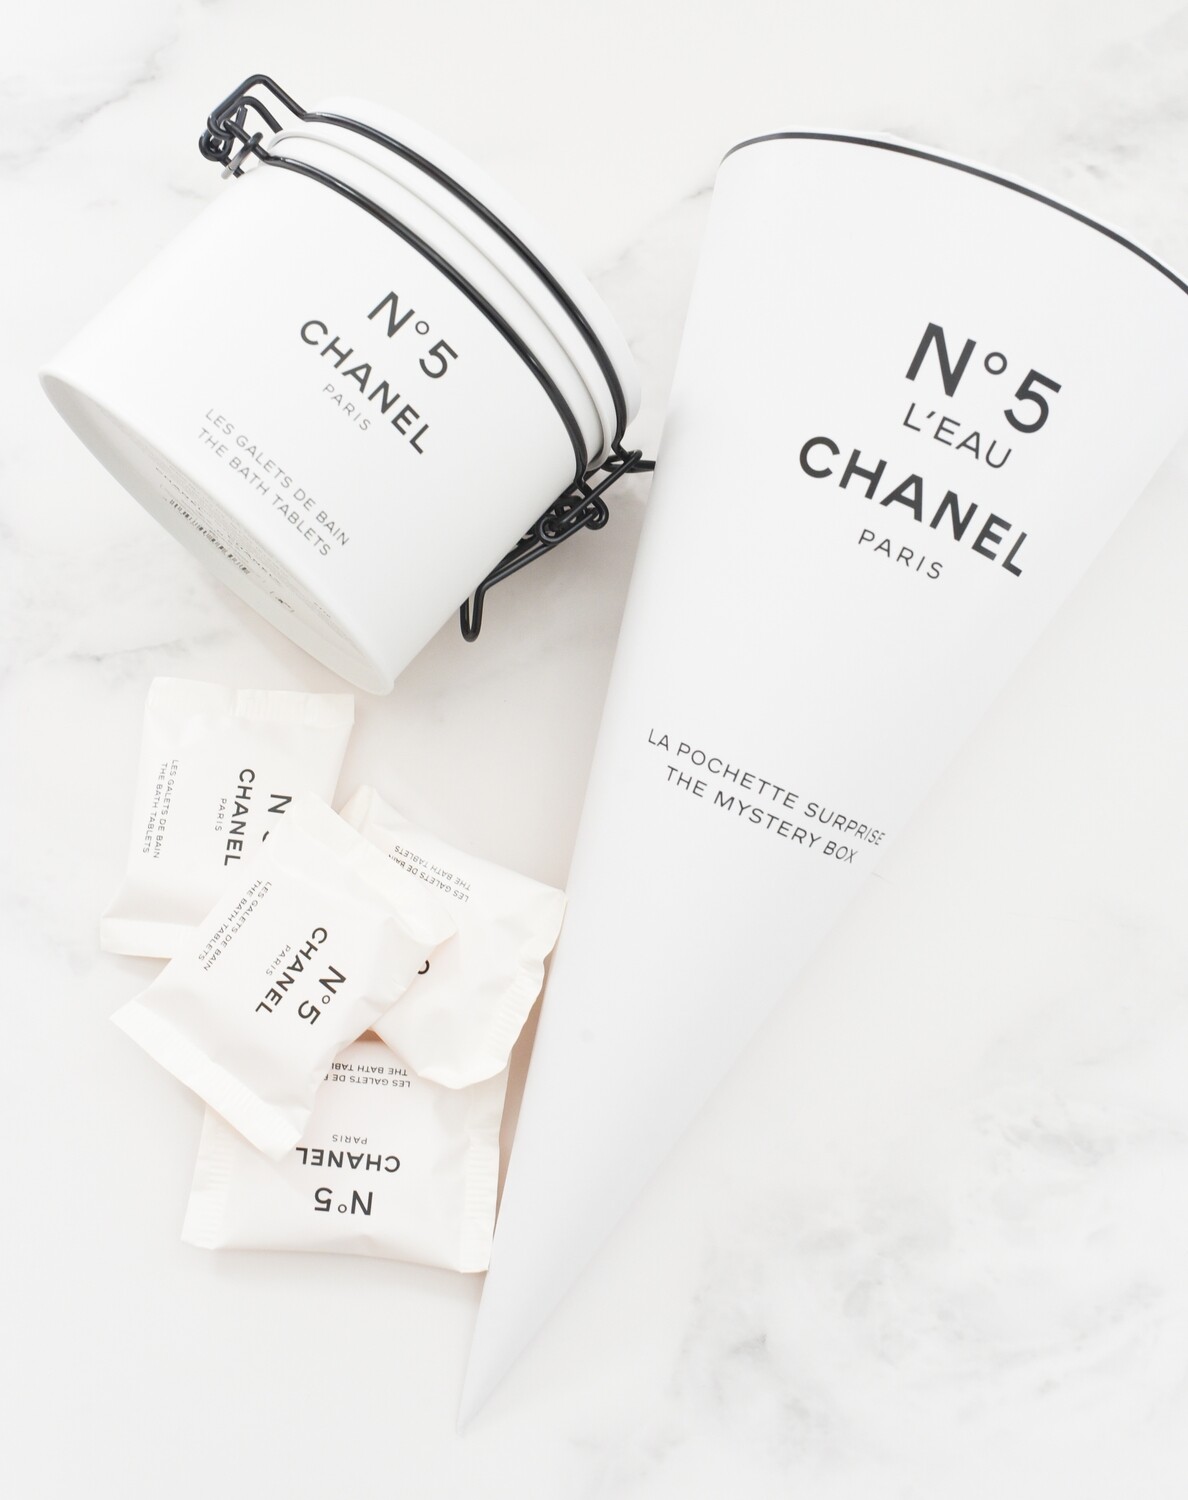 Chanel Factory No.5 Bath Tablets and Mystery Gift Set, New GA001